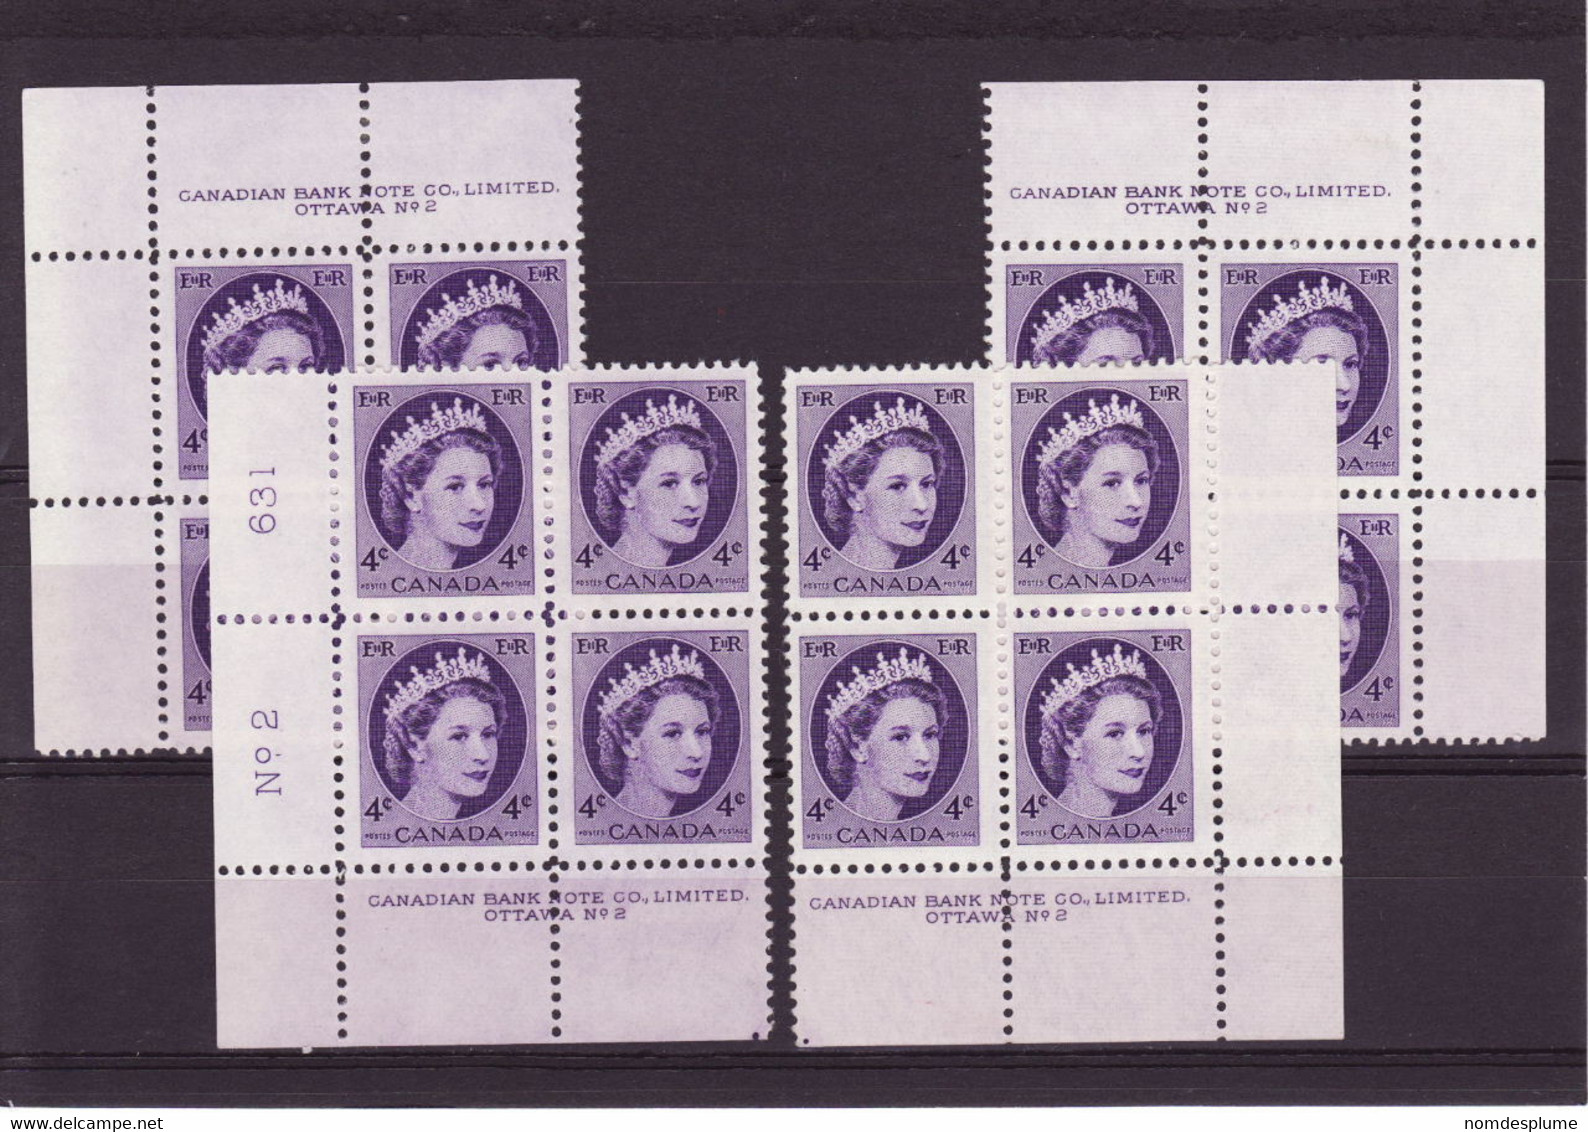 7859) Canada QE II Wilding Block  Mint Light Hinge Plate 2 - Num. Planches & Inscriptions Marge